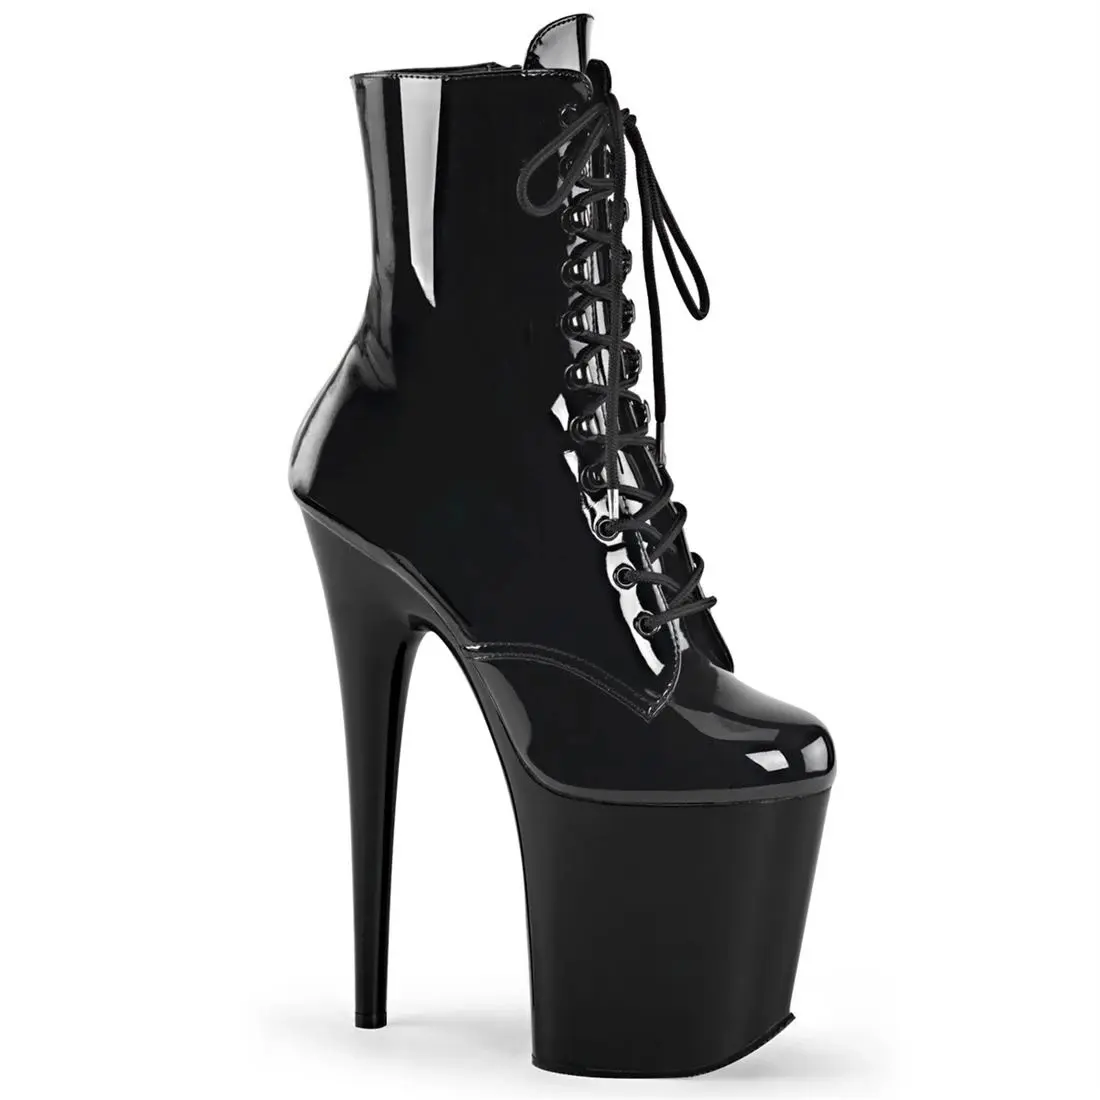 2021 fashion shoes high heels platform stiletto high heels new design thick black low ankle boots